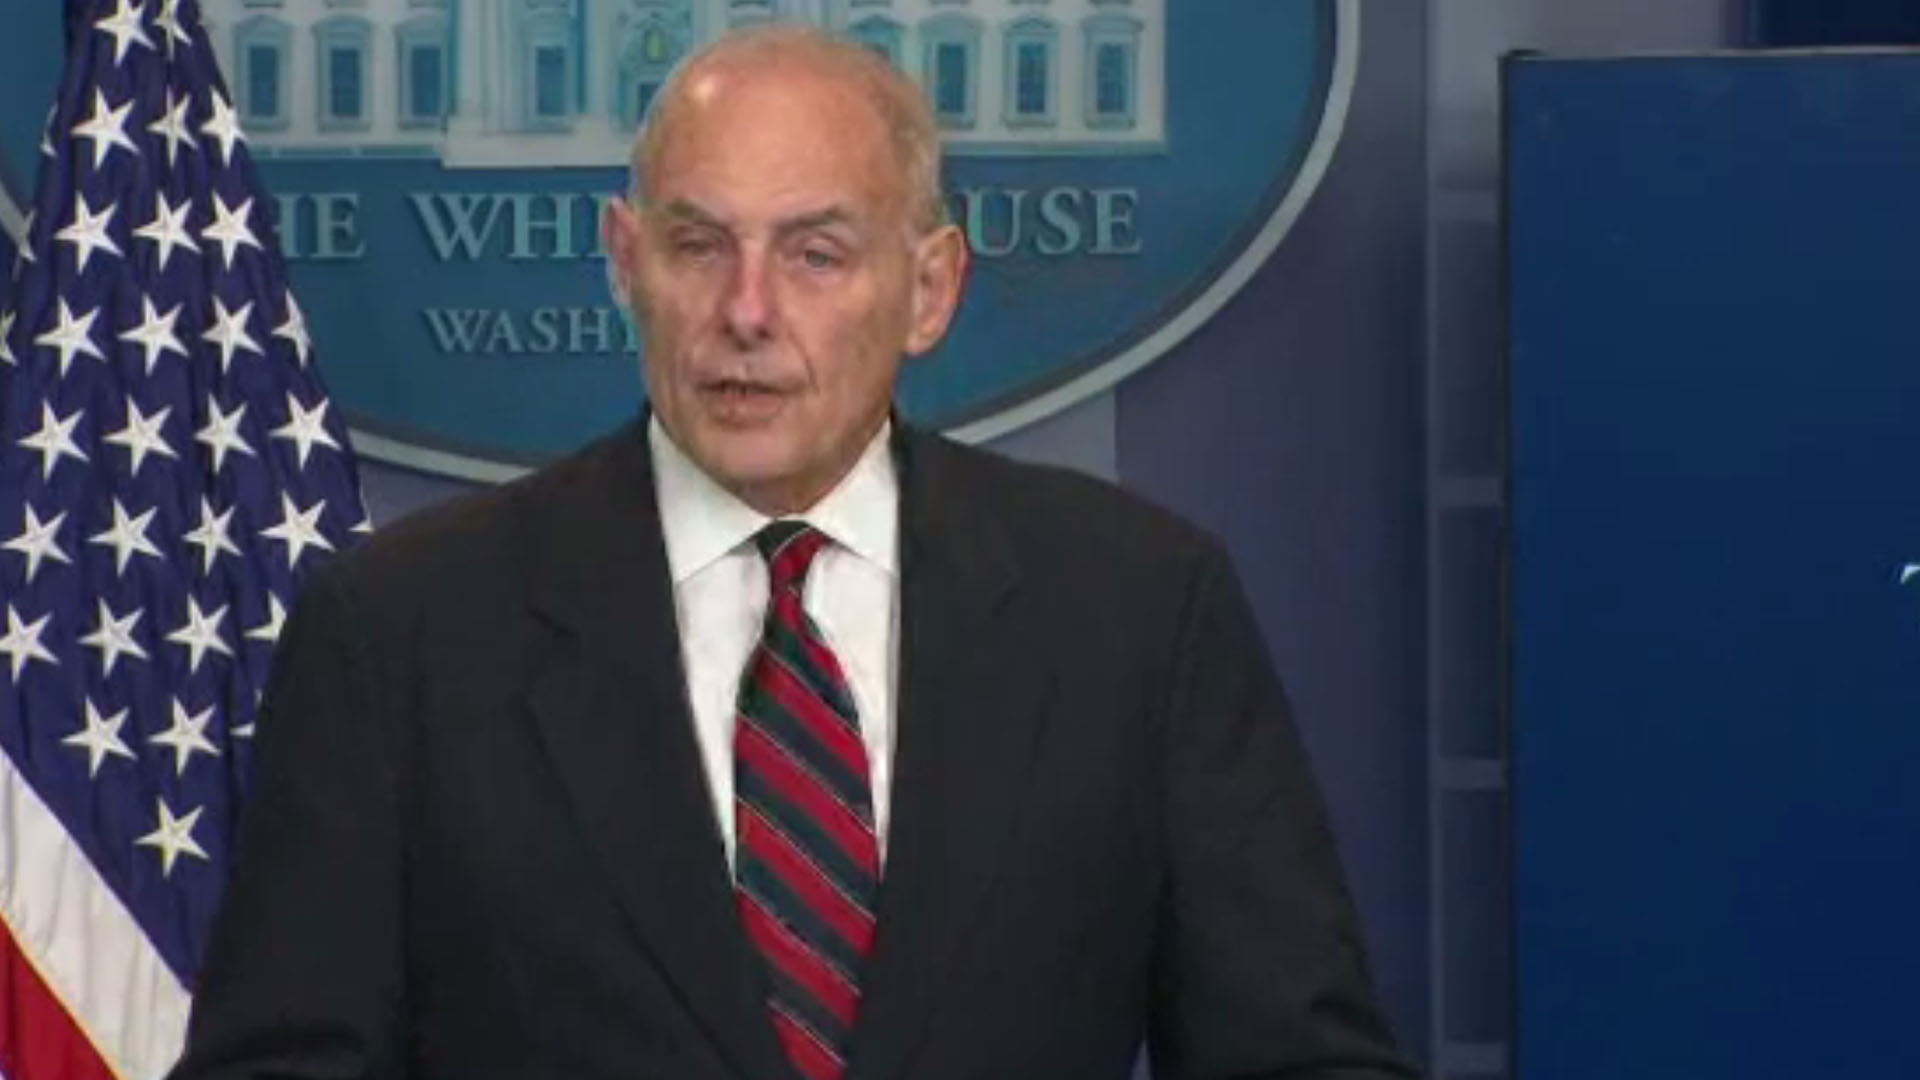 John Kelly staying in Washington for immigration negotiations